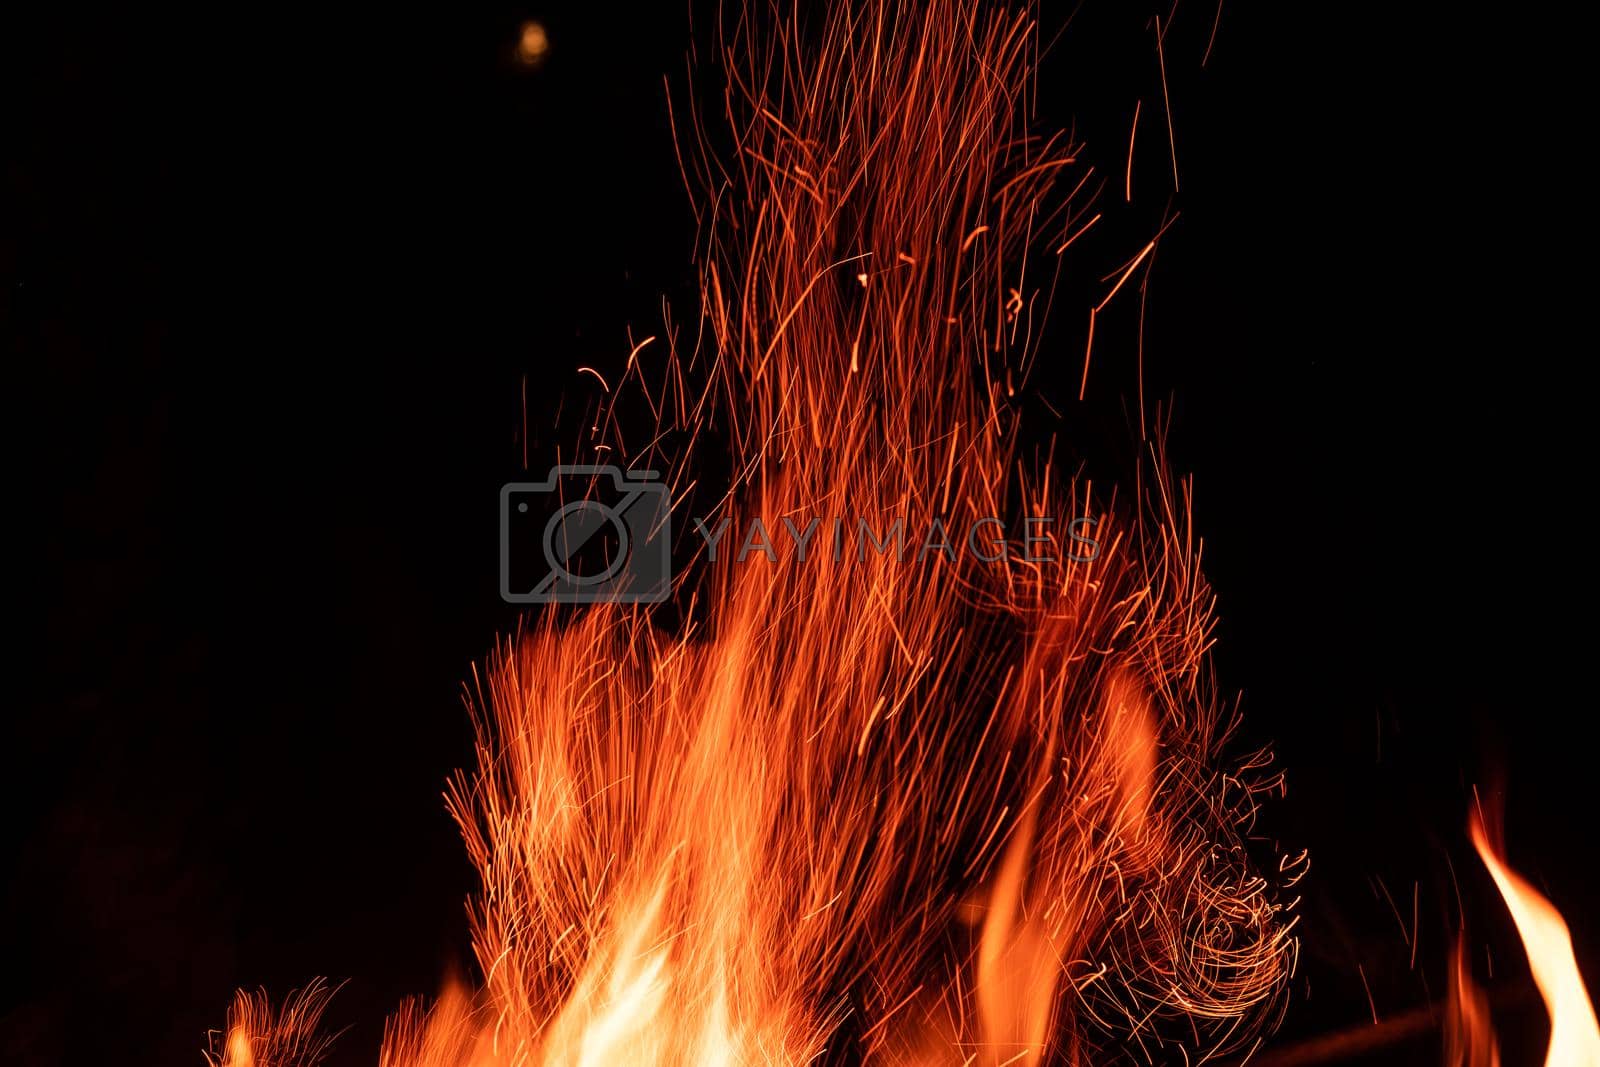 Royalty free image of Campfire flame isolated on black background by GekaSkr